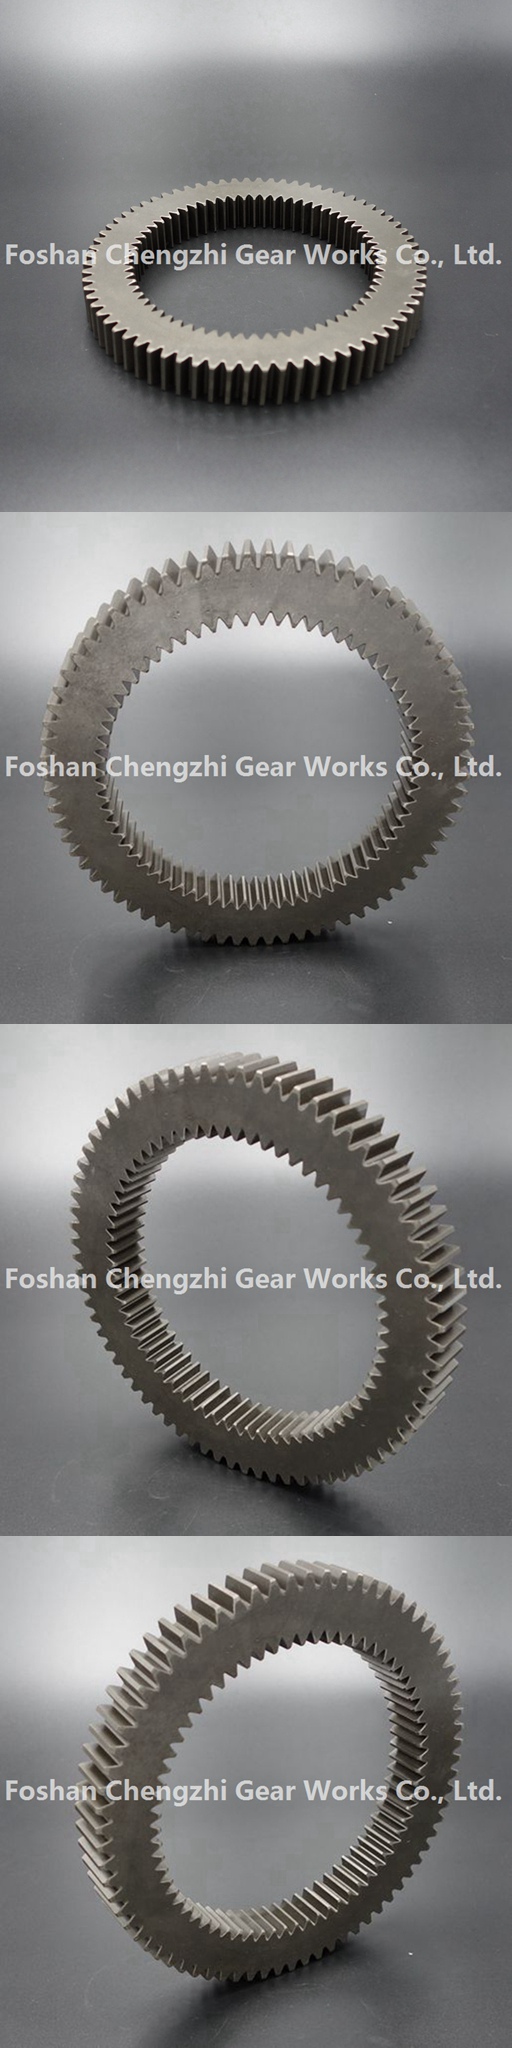 High Precision Customized Transmission Gear Ring Gear for Various Machinery